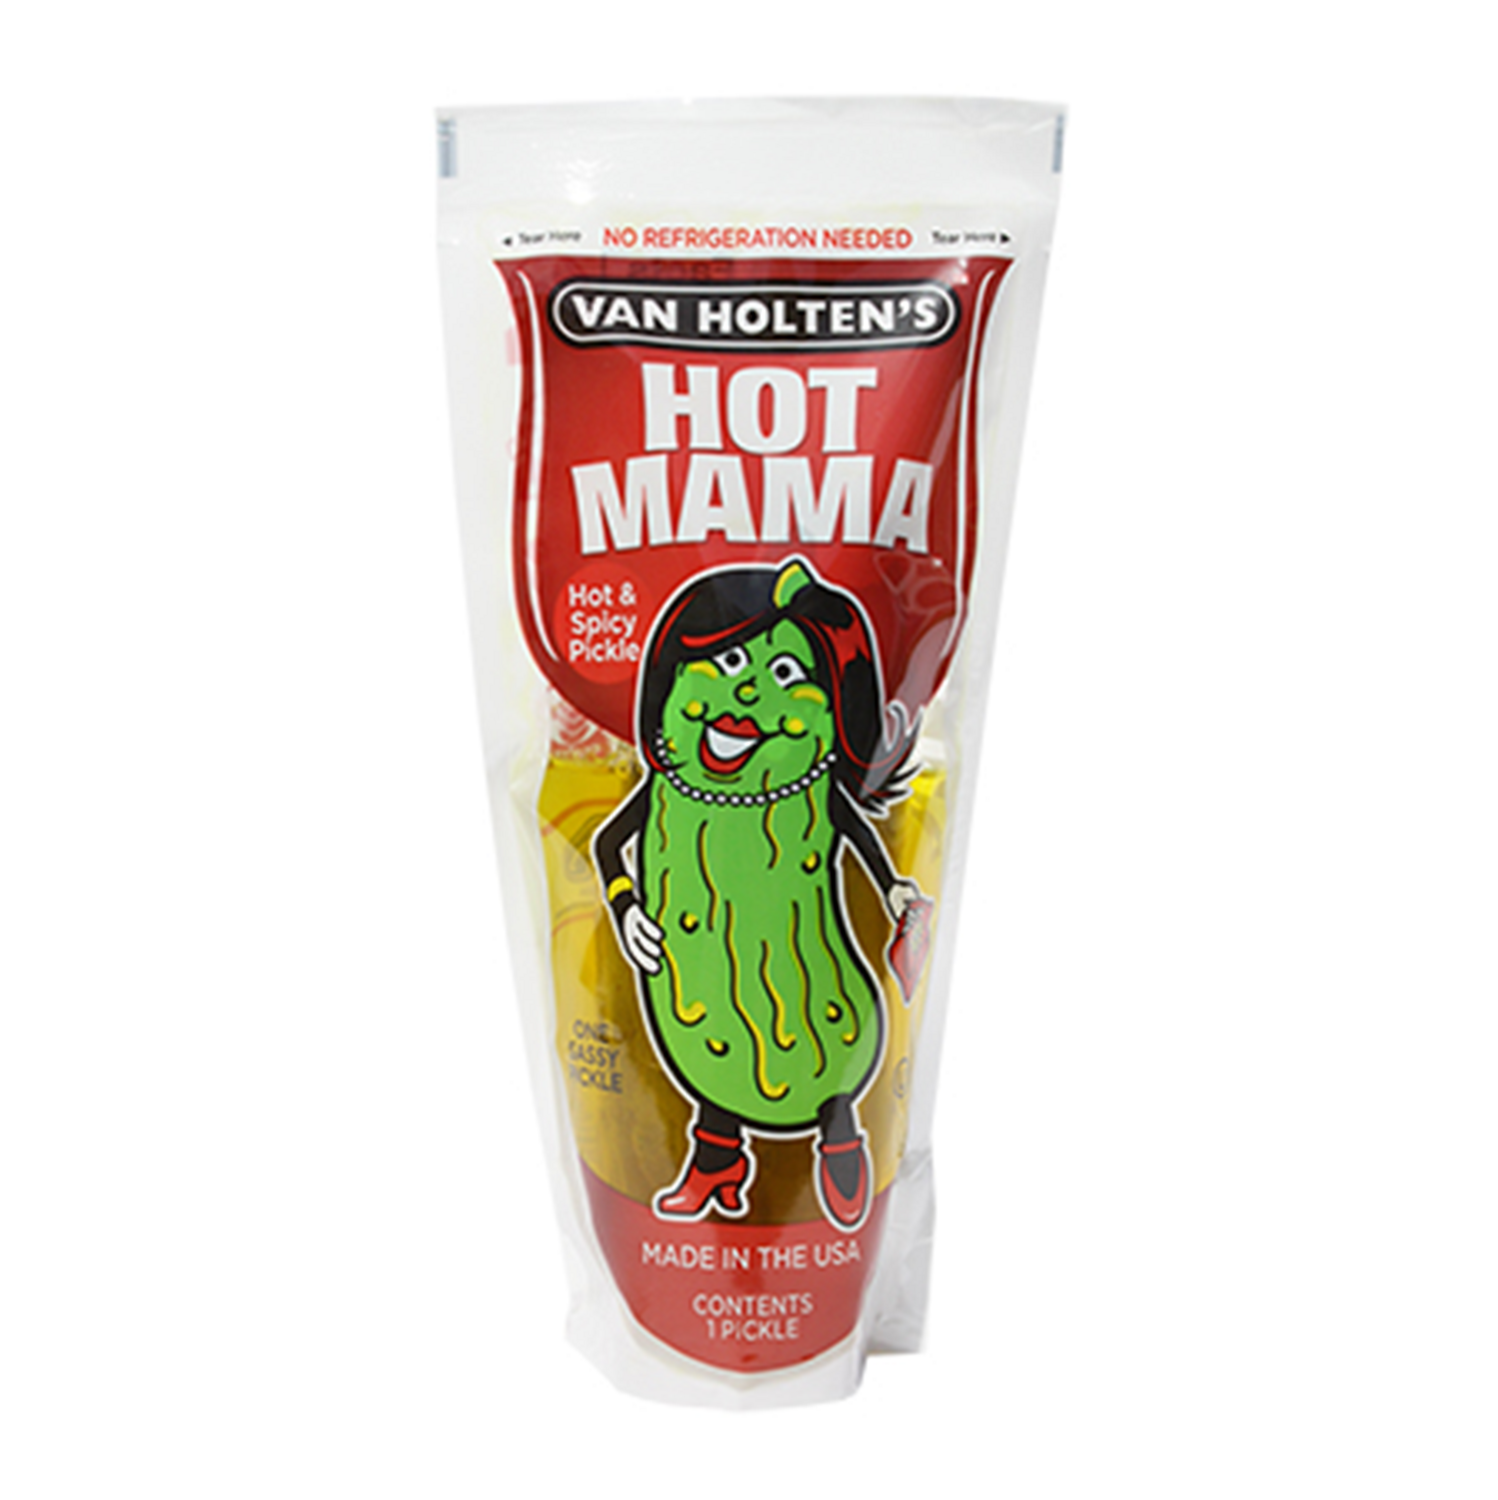 Van Holten's Pickle in a Pouch Hot Mama Pickle